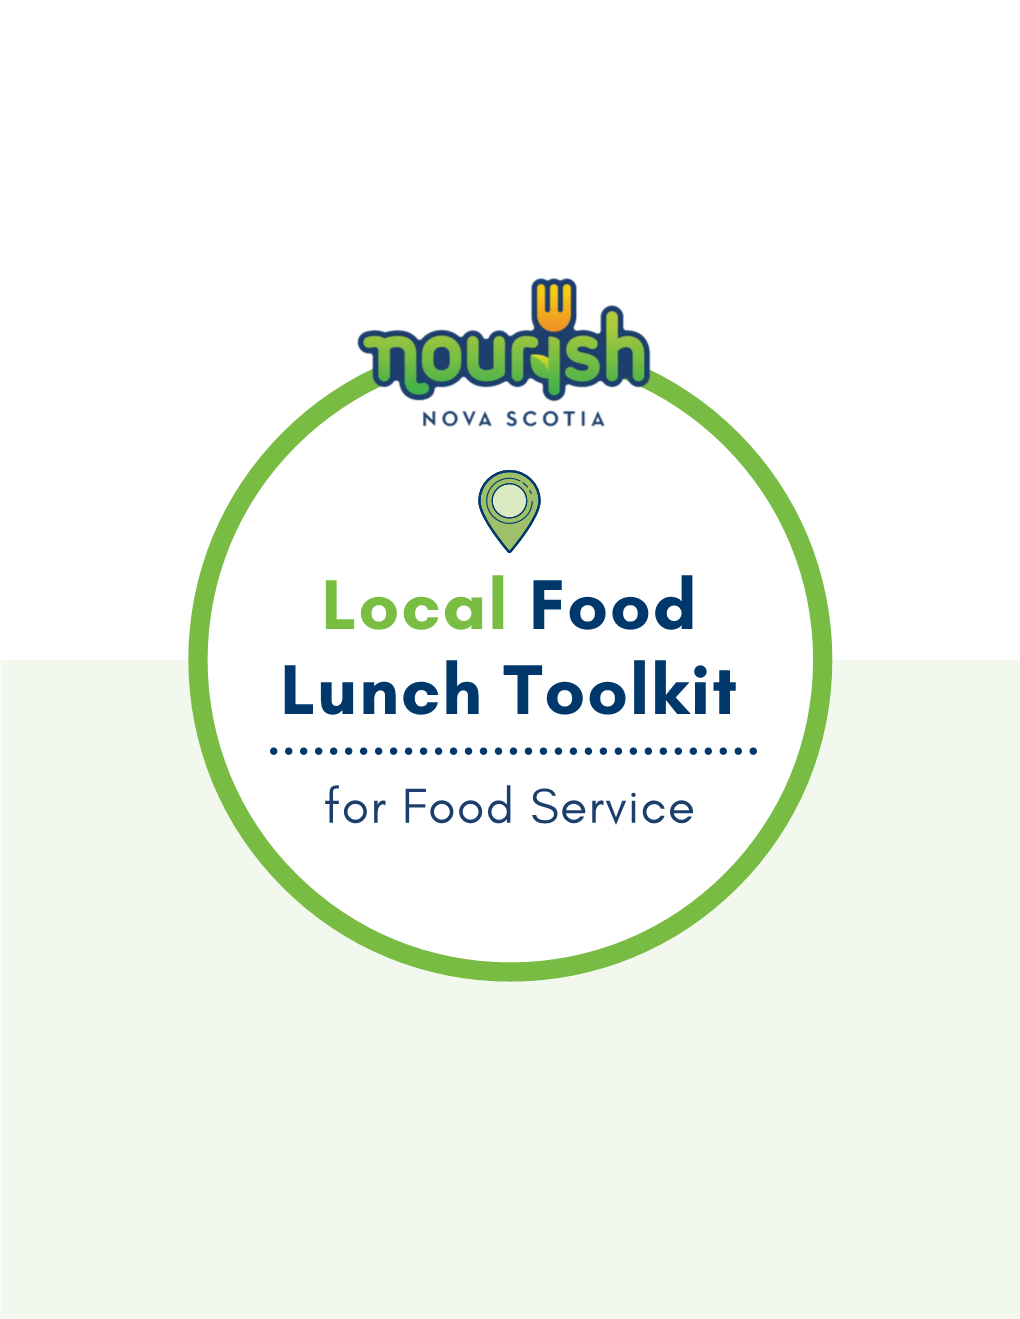 Local Food Lunch Toolkit for Food Service